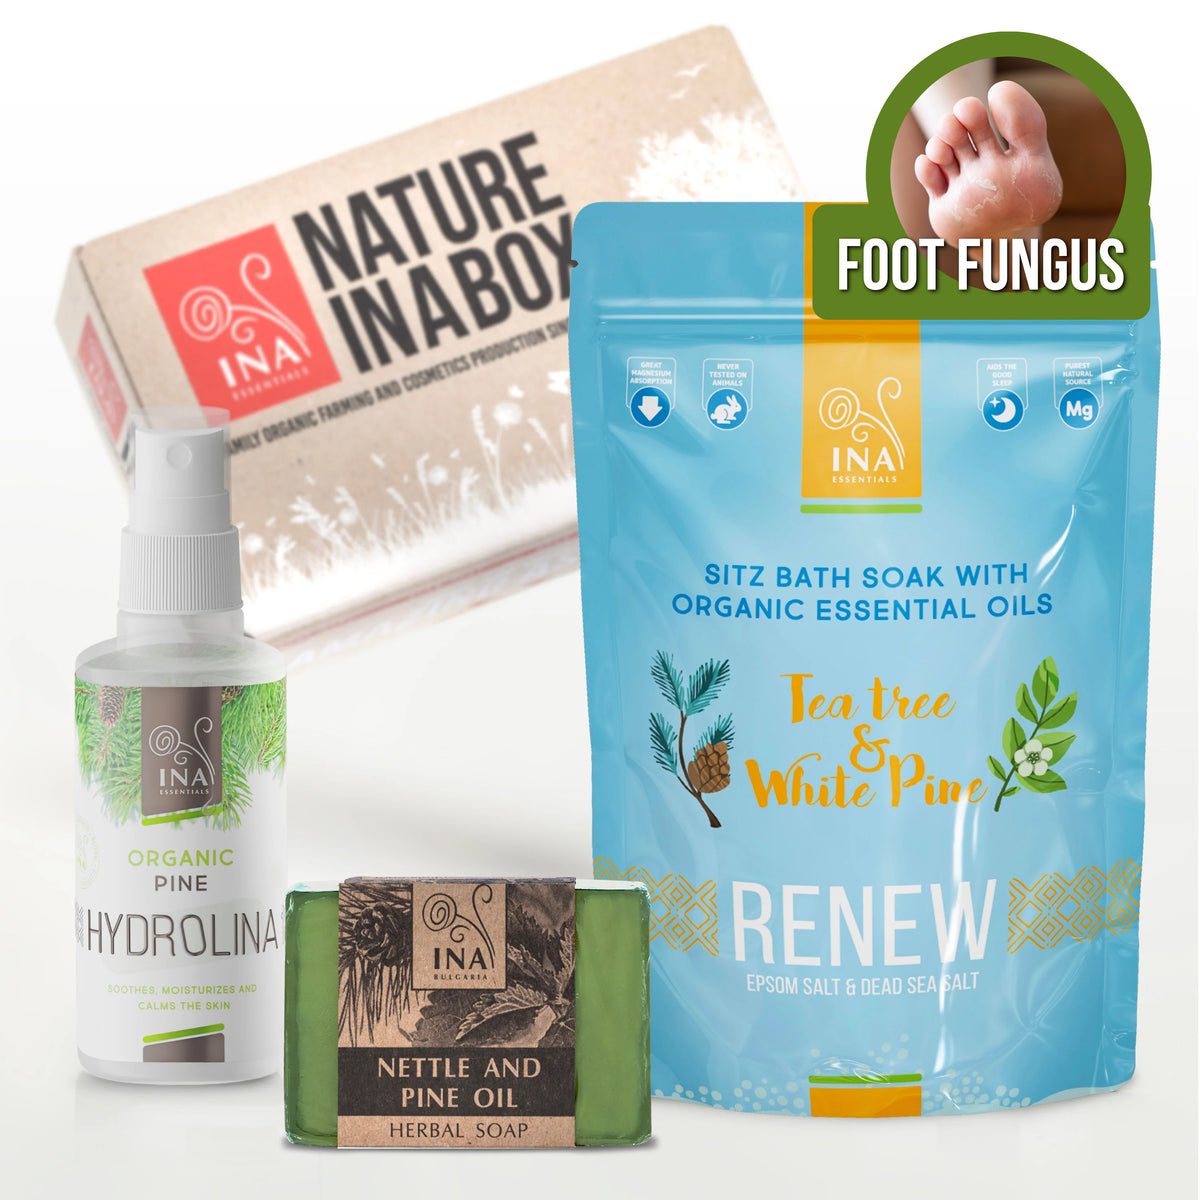 Nail Fungus RoutINA™ - lasting solution for Fungus & Smelly feet